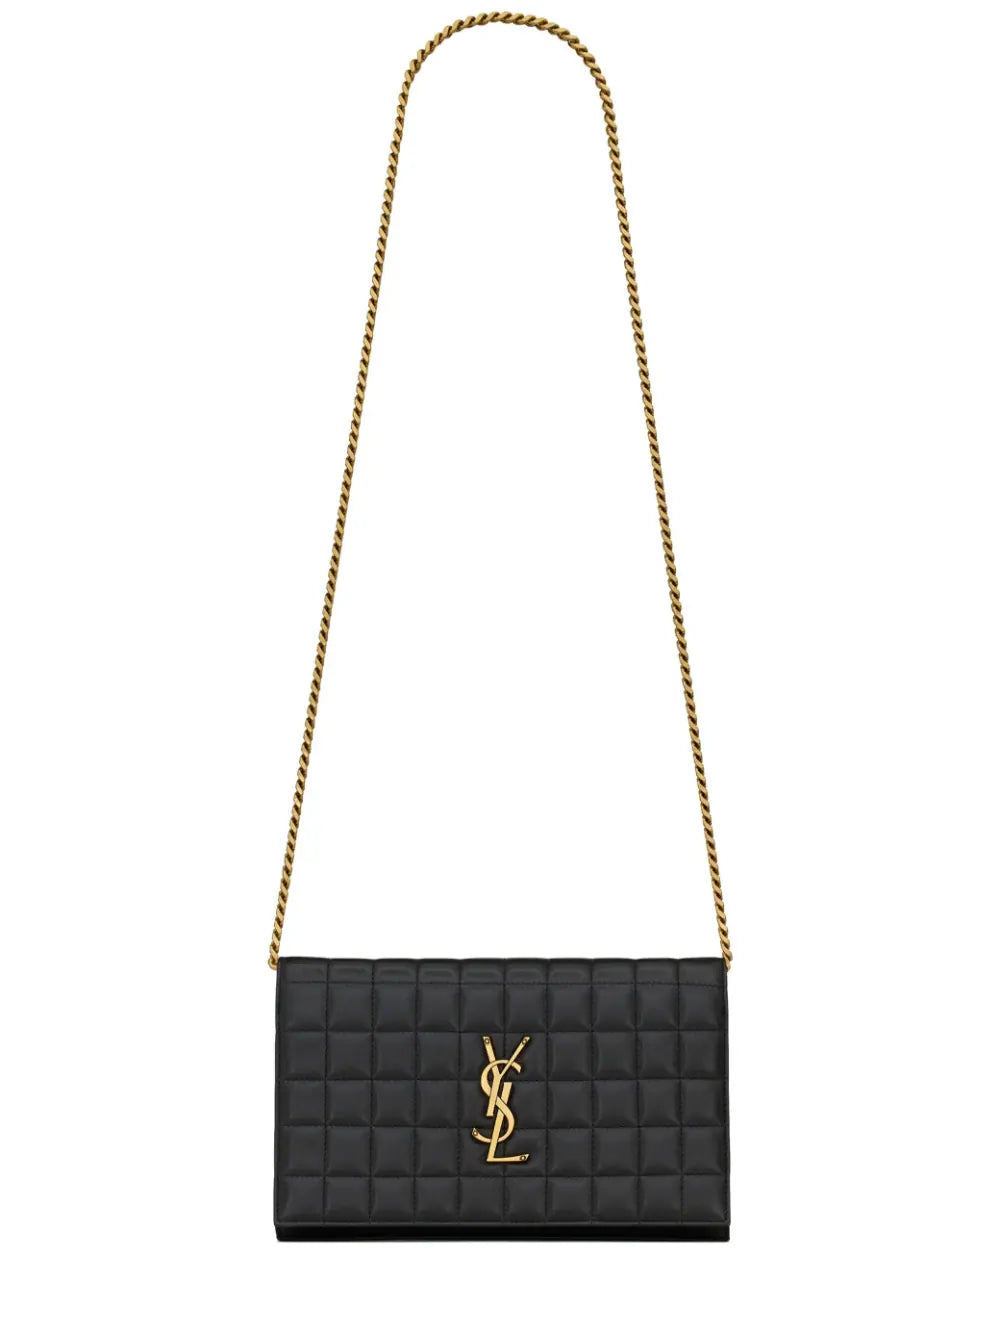 Saint Laurent Giant Quilted Leather Es Travel Bag in Black | Lyst